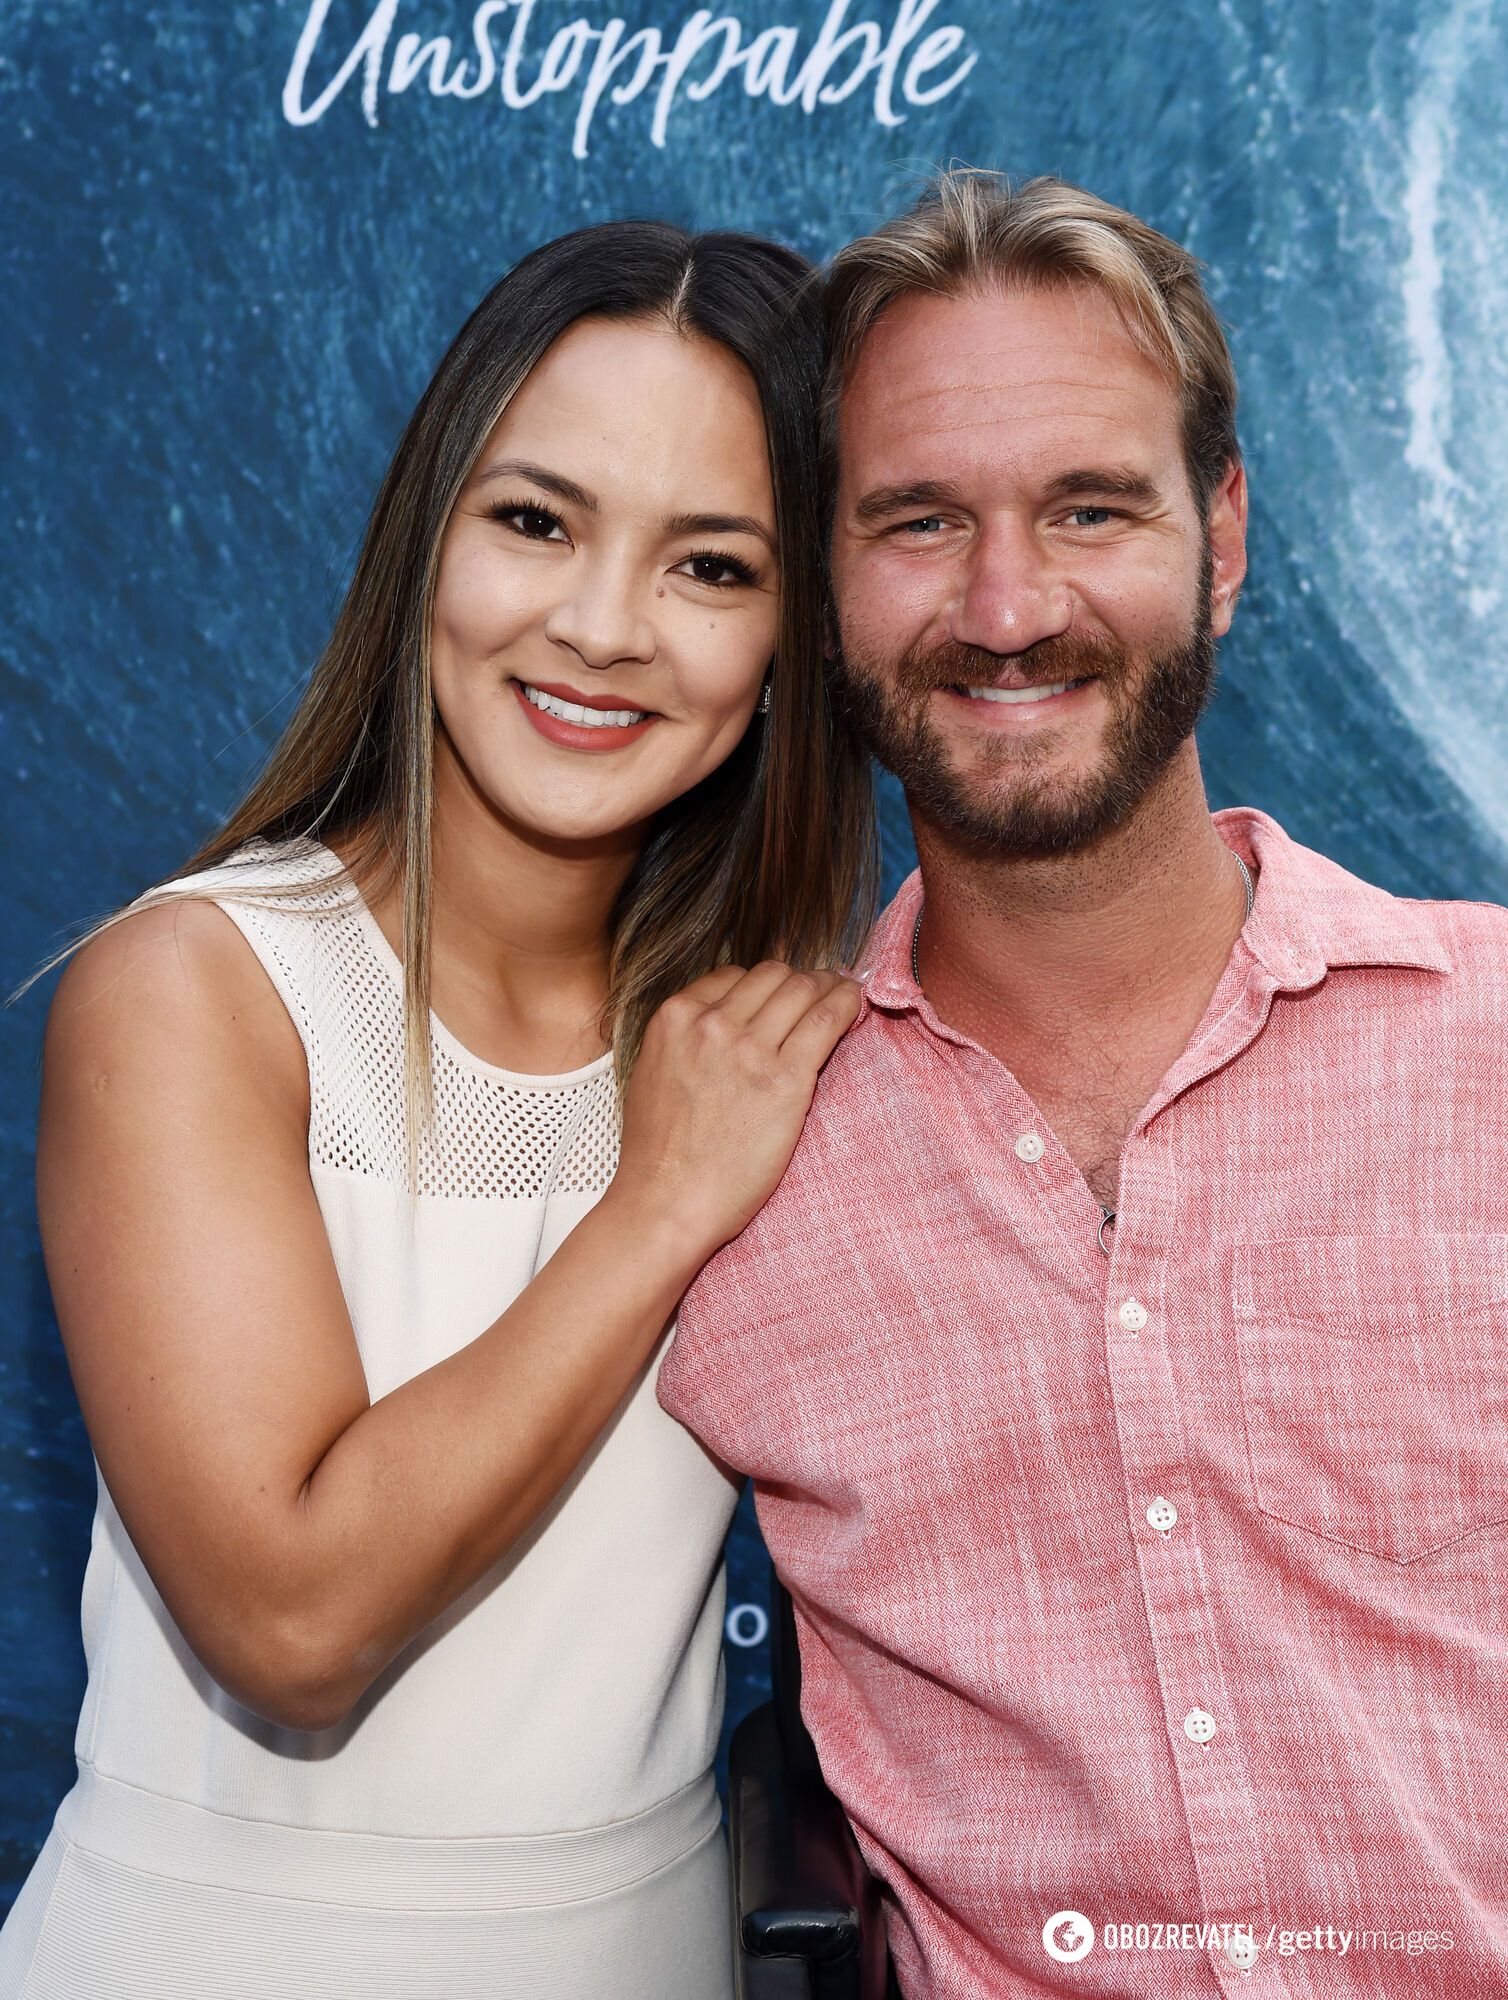 Where did the legendary man Nick Vujicic disappear to and why are there no recent photos of his family online?